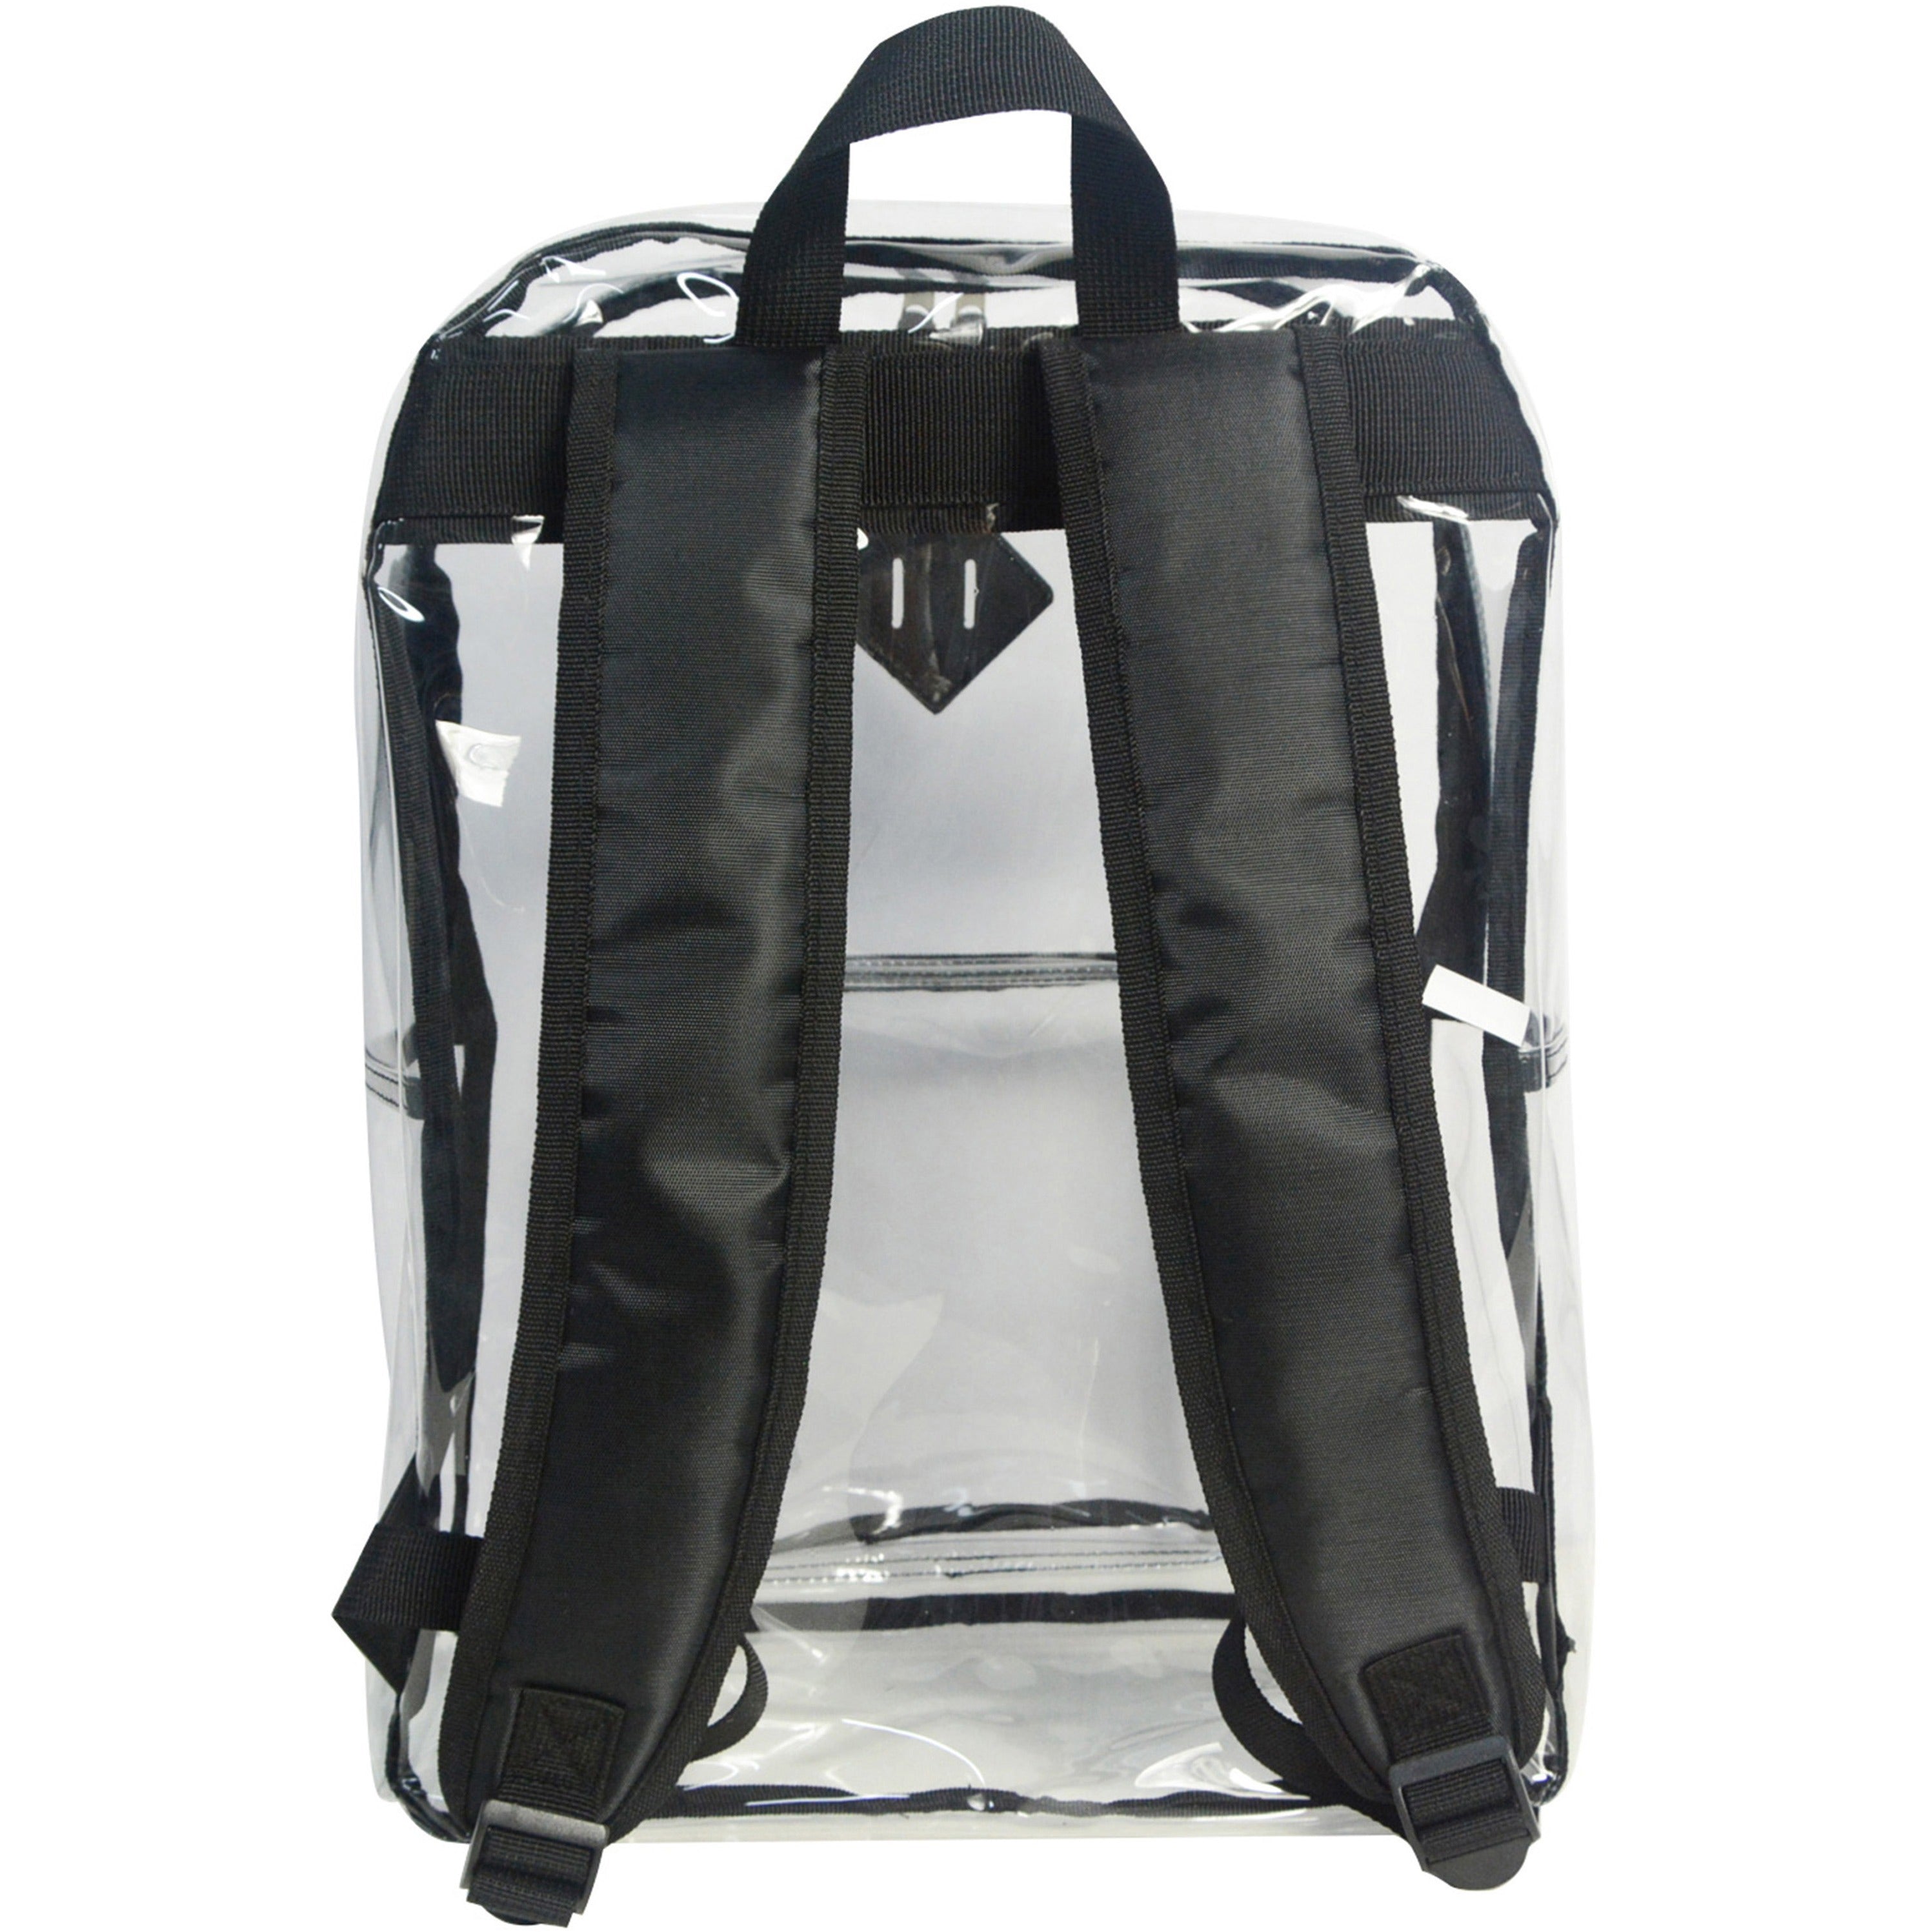 sparco-carrying-case-backpack-multipurpose-clear-polyvinyl-chloride-pvc-420d-oxford-body-shoulder-strap-handle-17-height-x-12-width-x-5-depth-1-each_spr61617 - 3